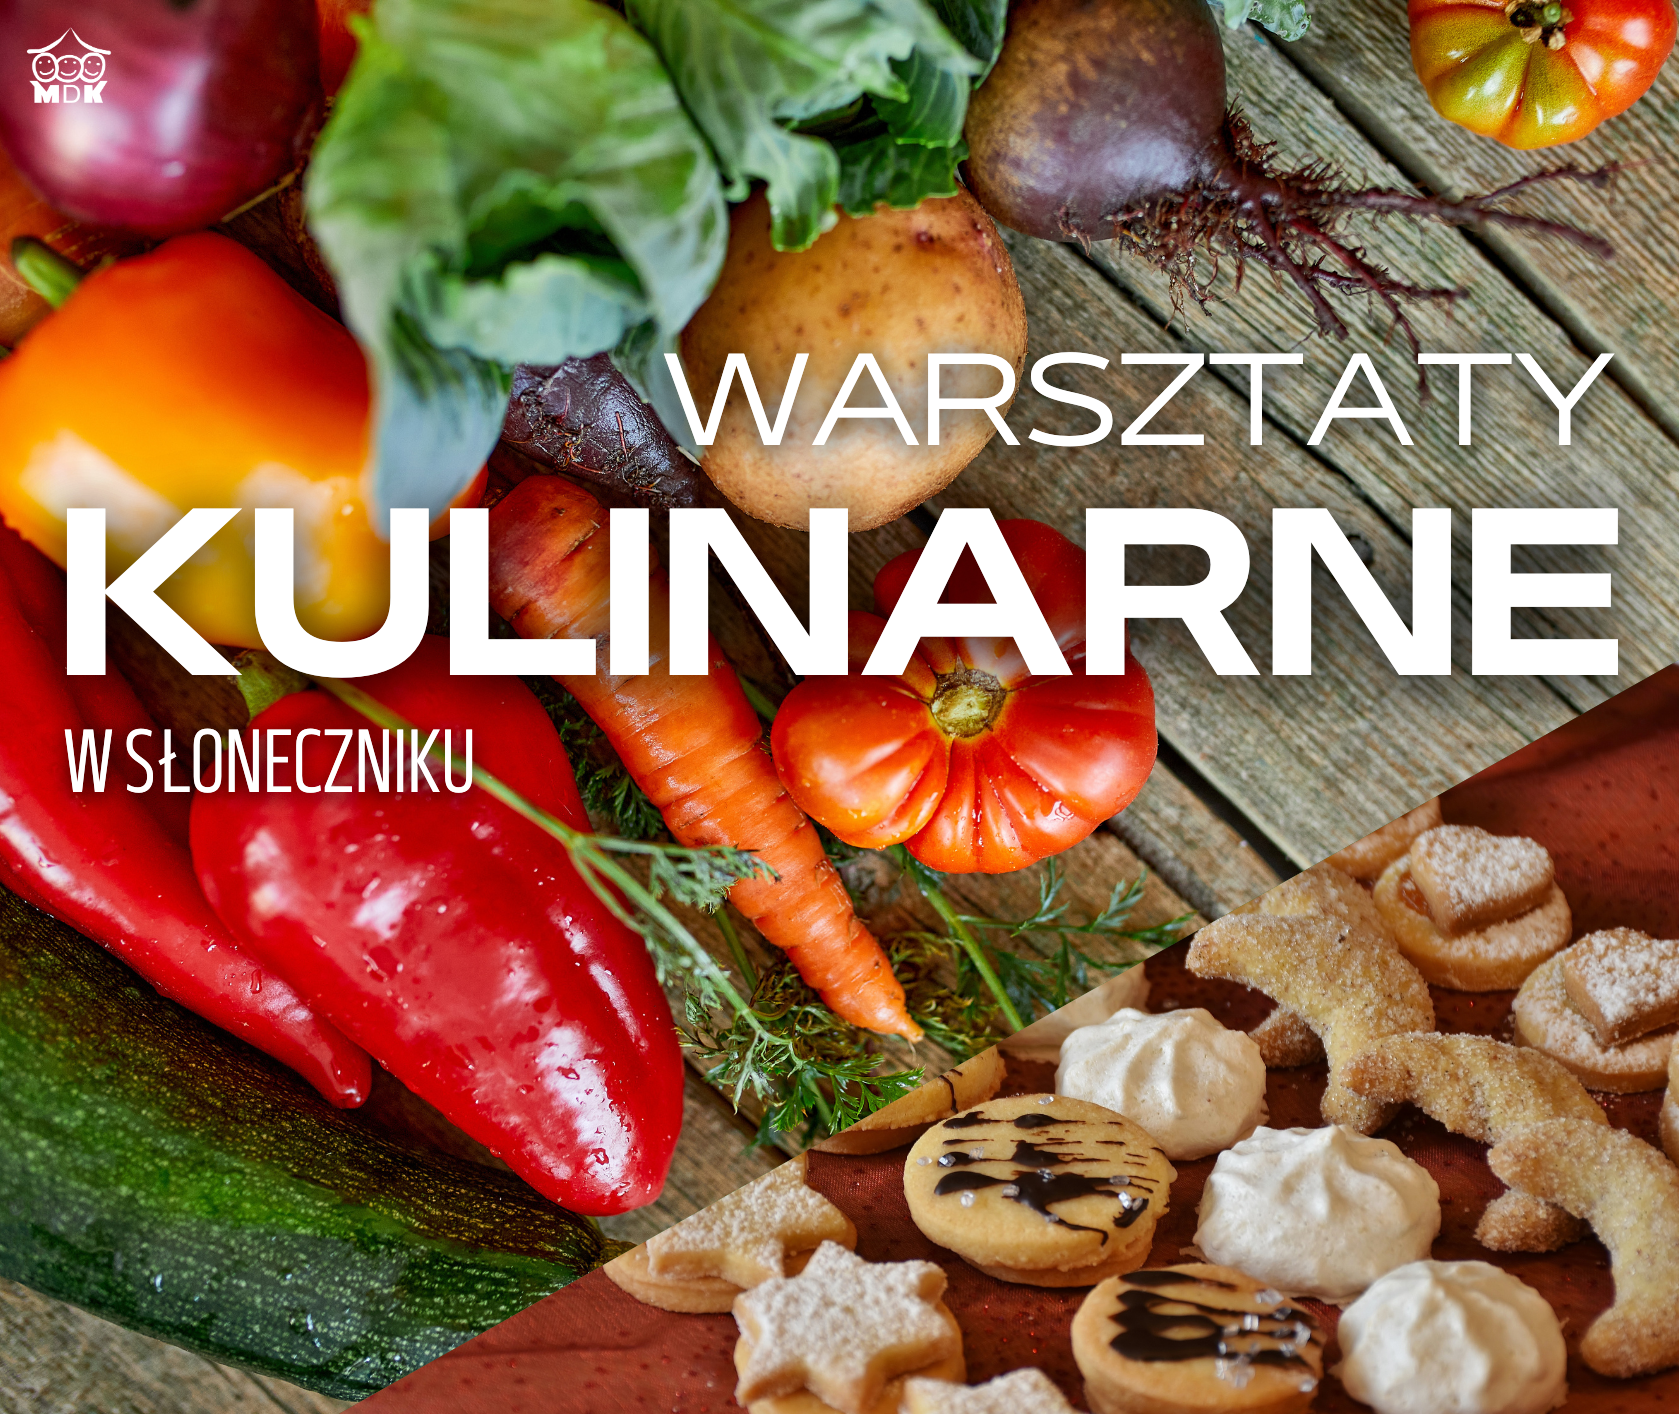 You are currently viewing Warsztaty kulinarne